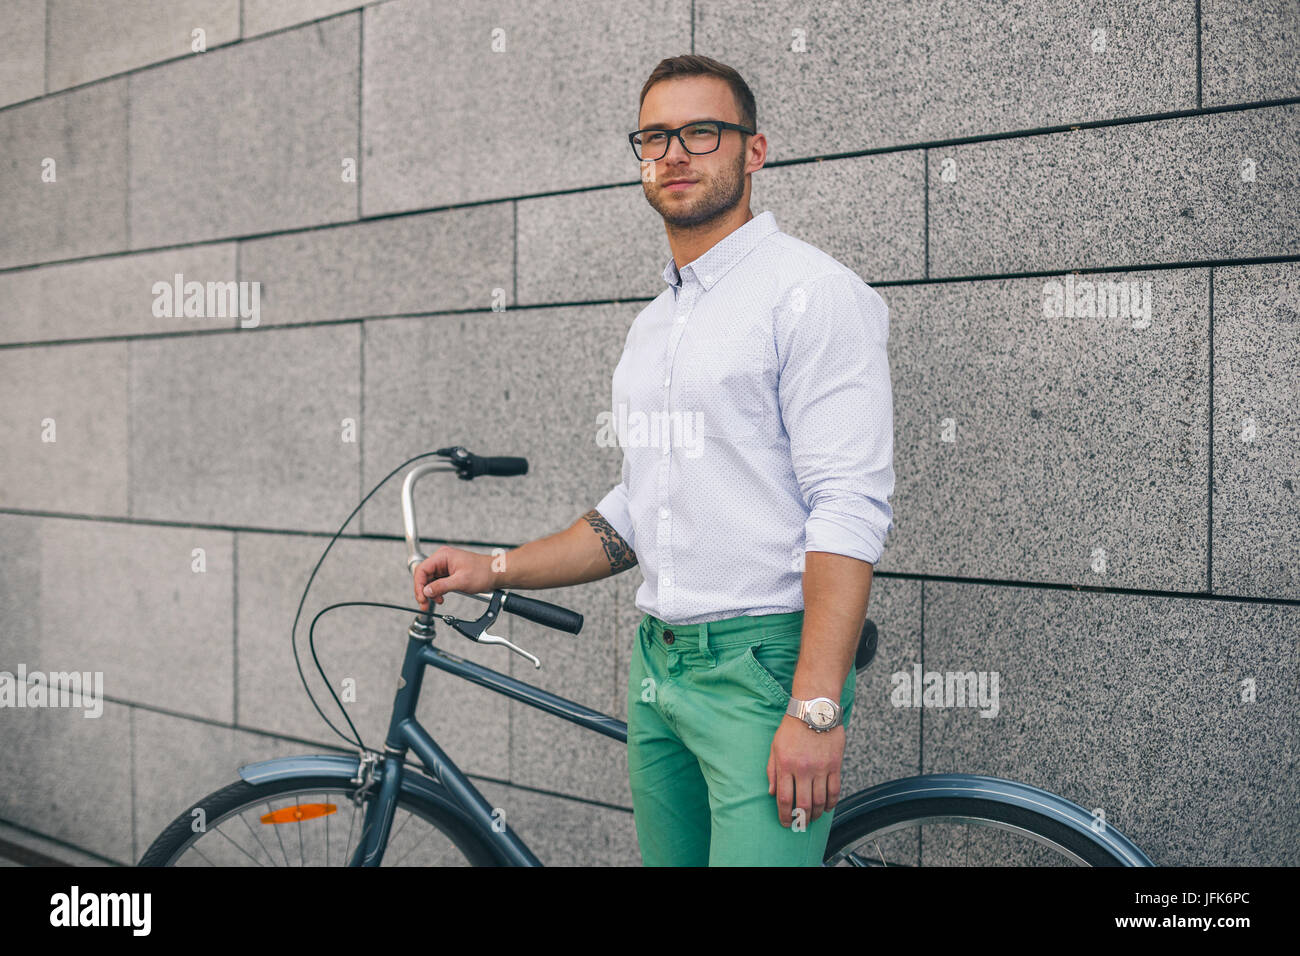 Confident business man with bike. Confident young handsome man in shirt Stock Photo